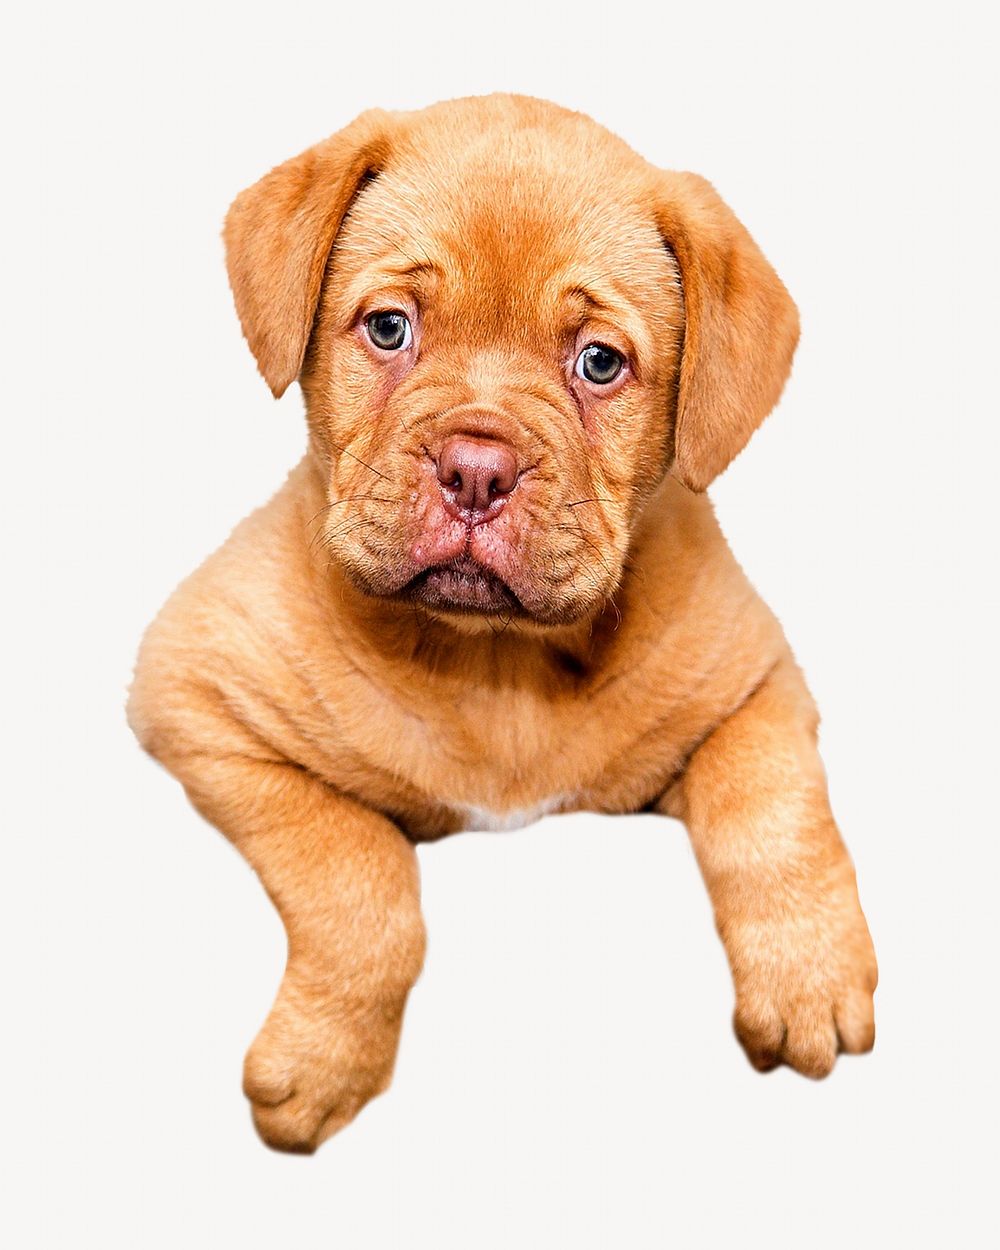 Cute puppy, isolated animal image